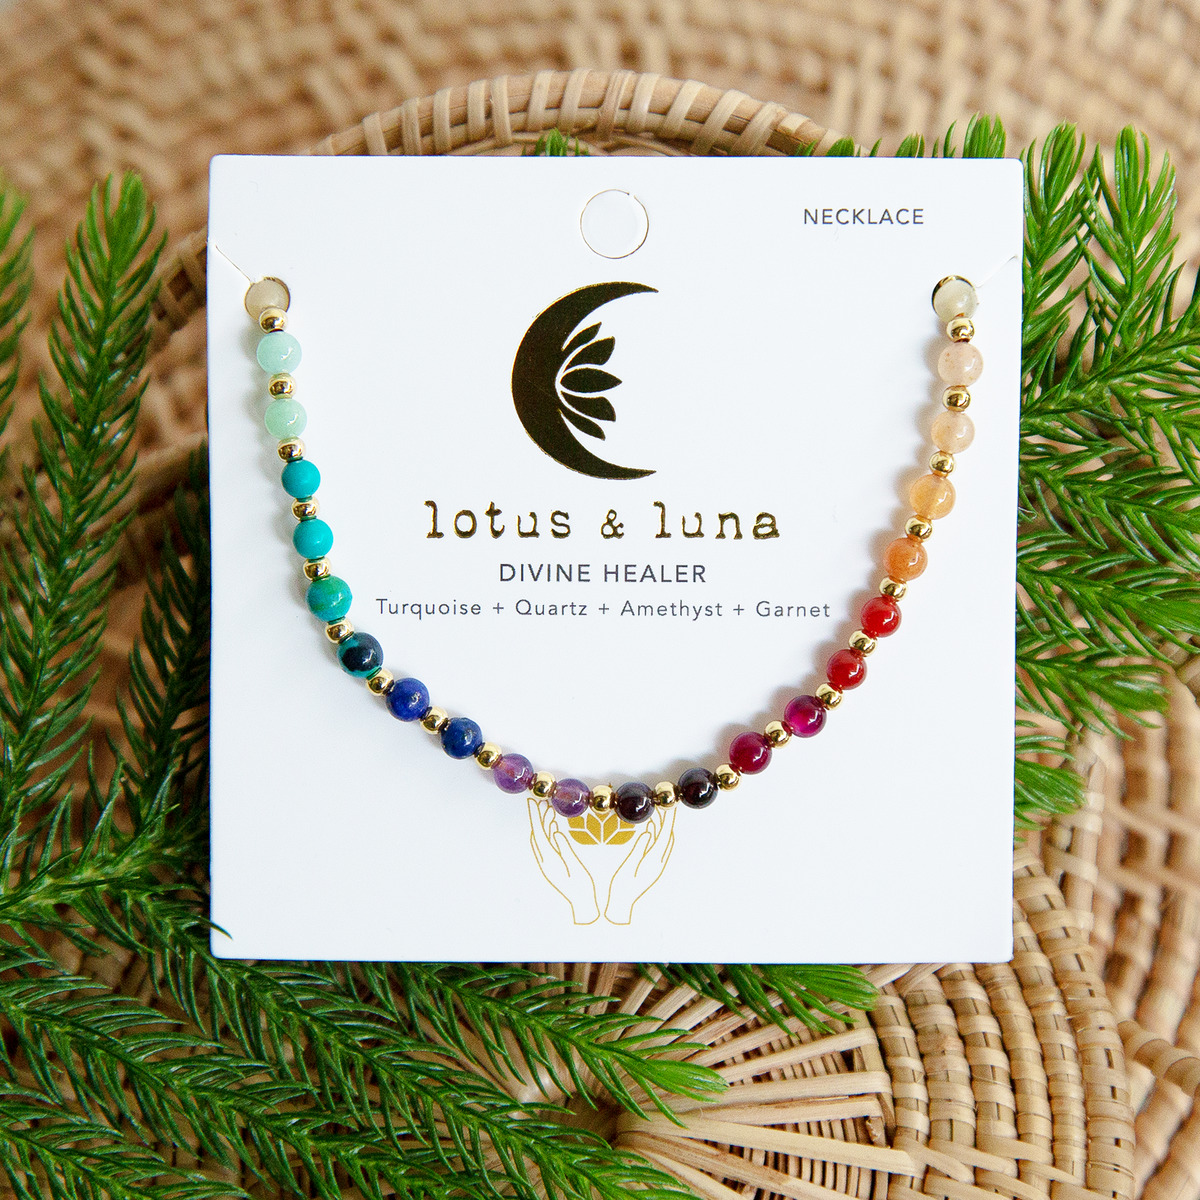 4mm multicolor stone and gold bead healing necklace on jewelry card